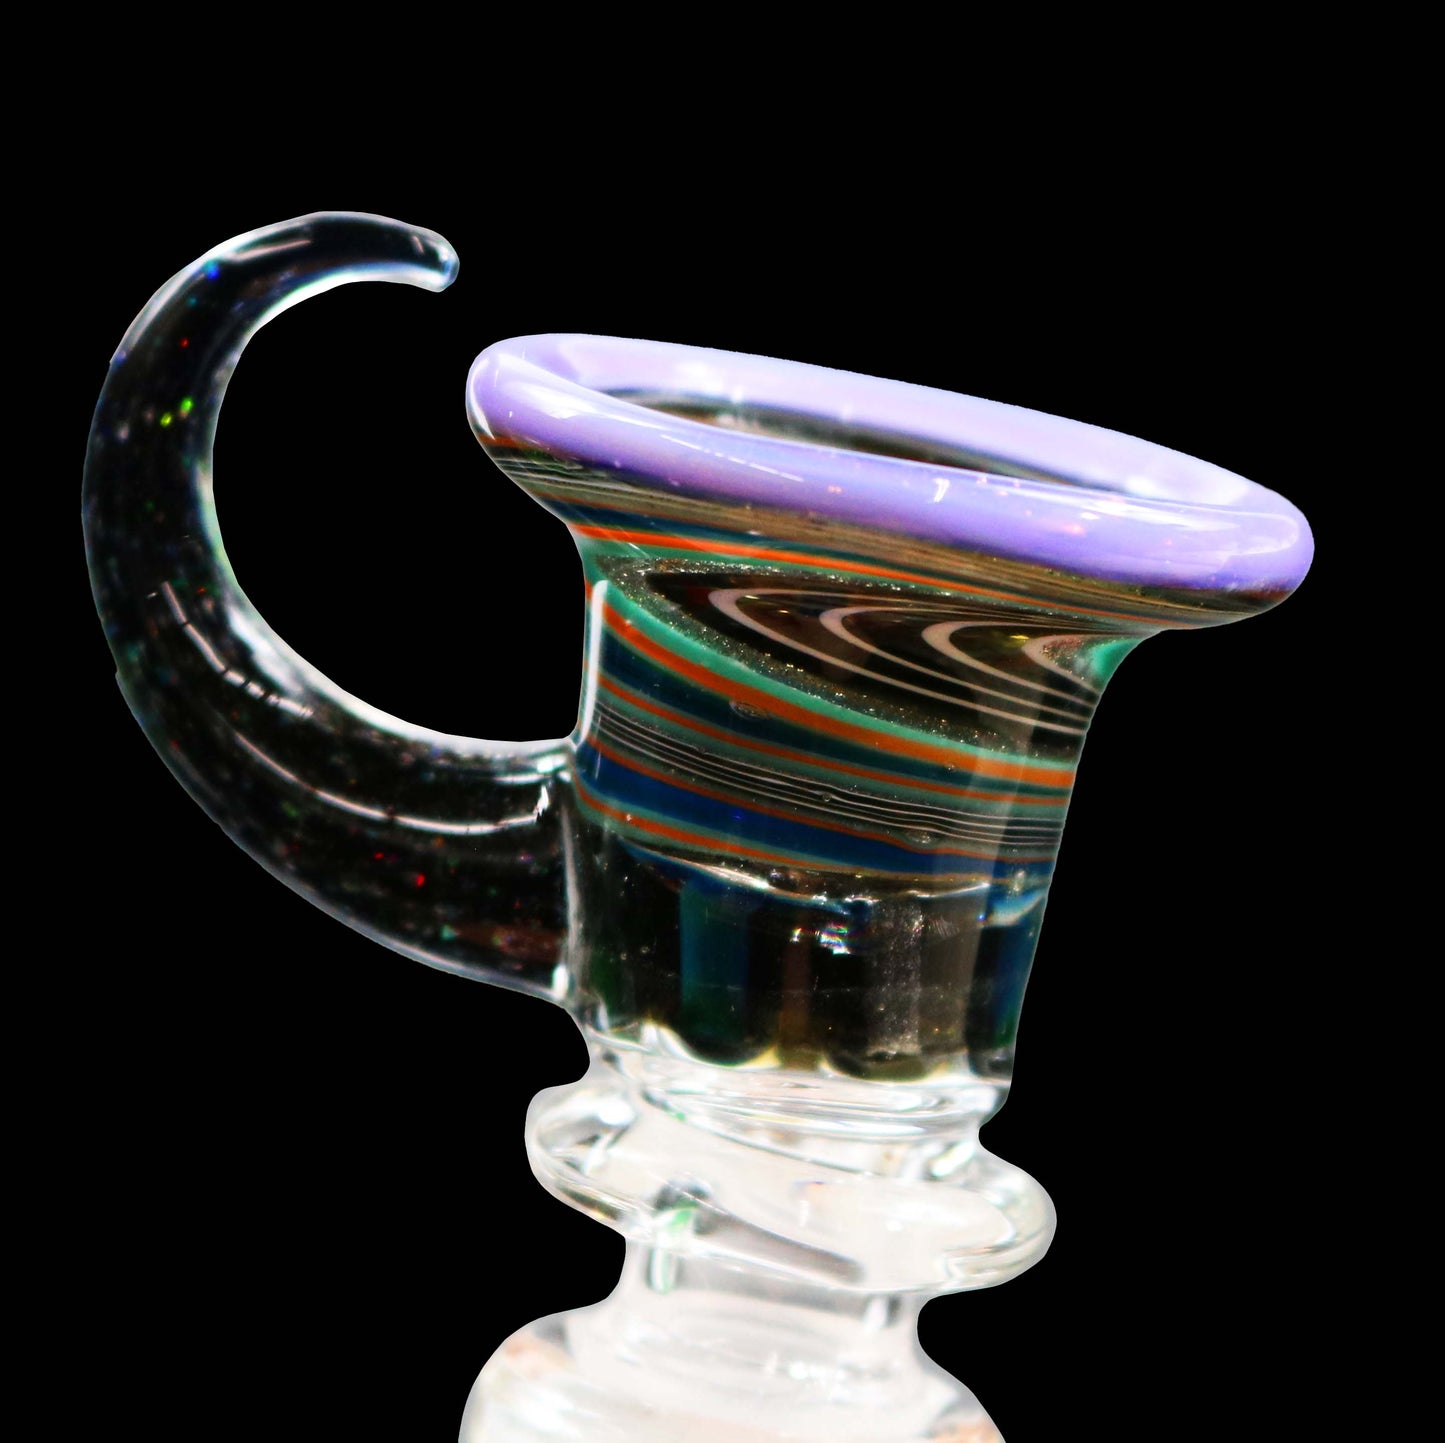 14mm Martini Bong Slide with built in screen from Glass by Slick- Purple/Green/Orange